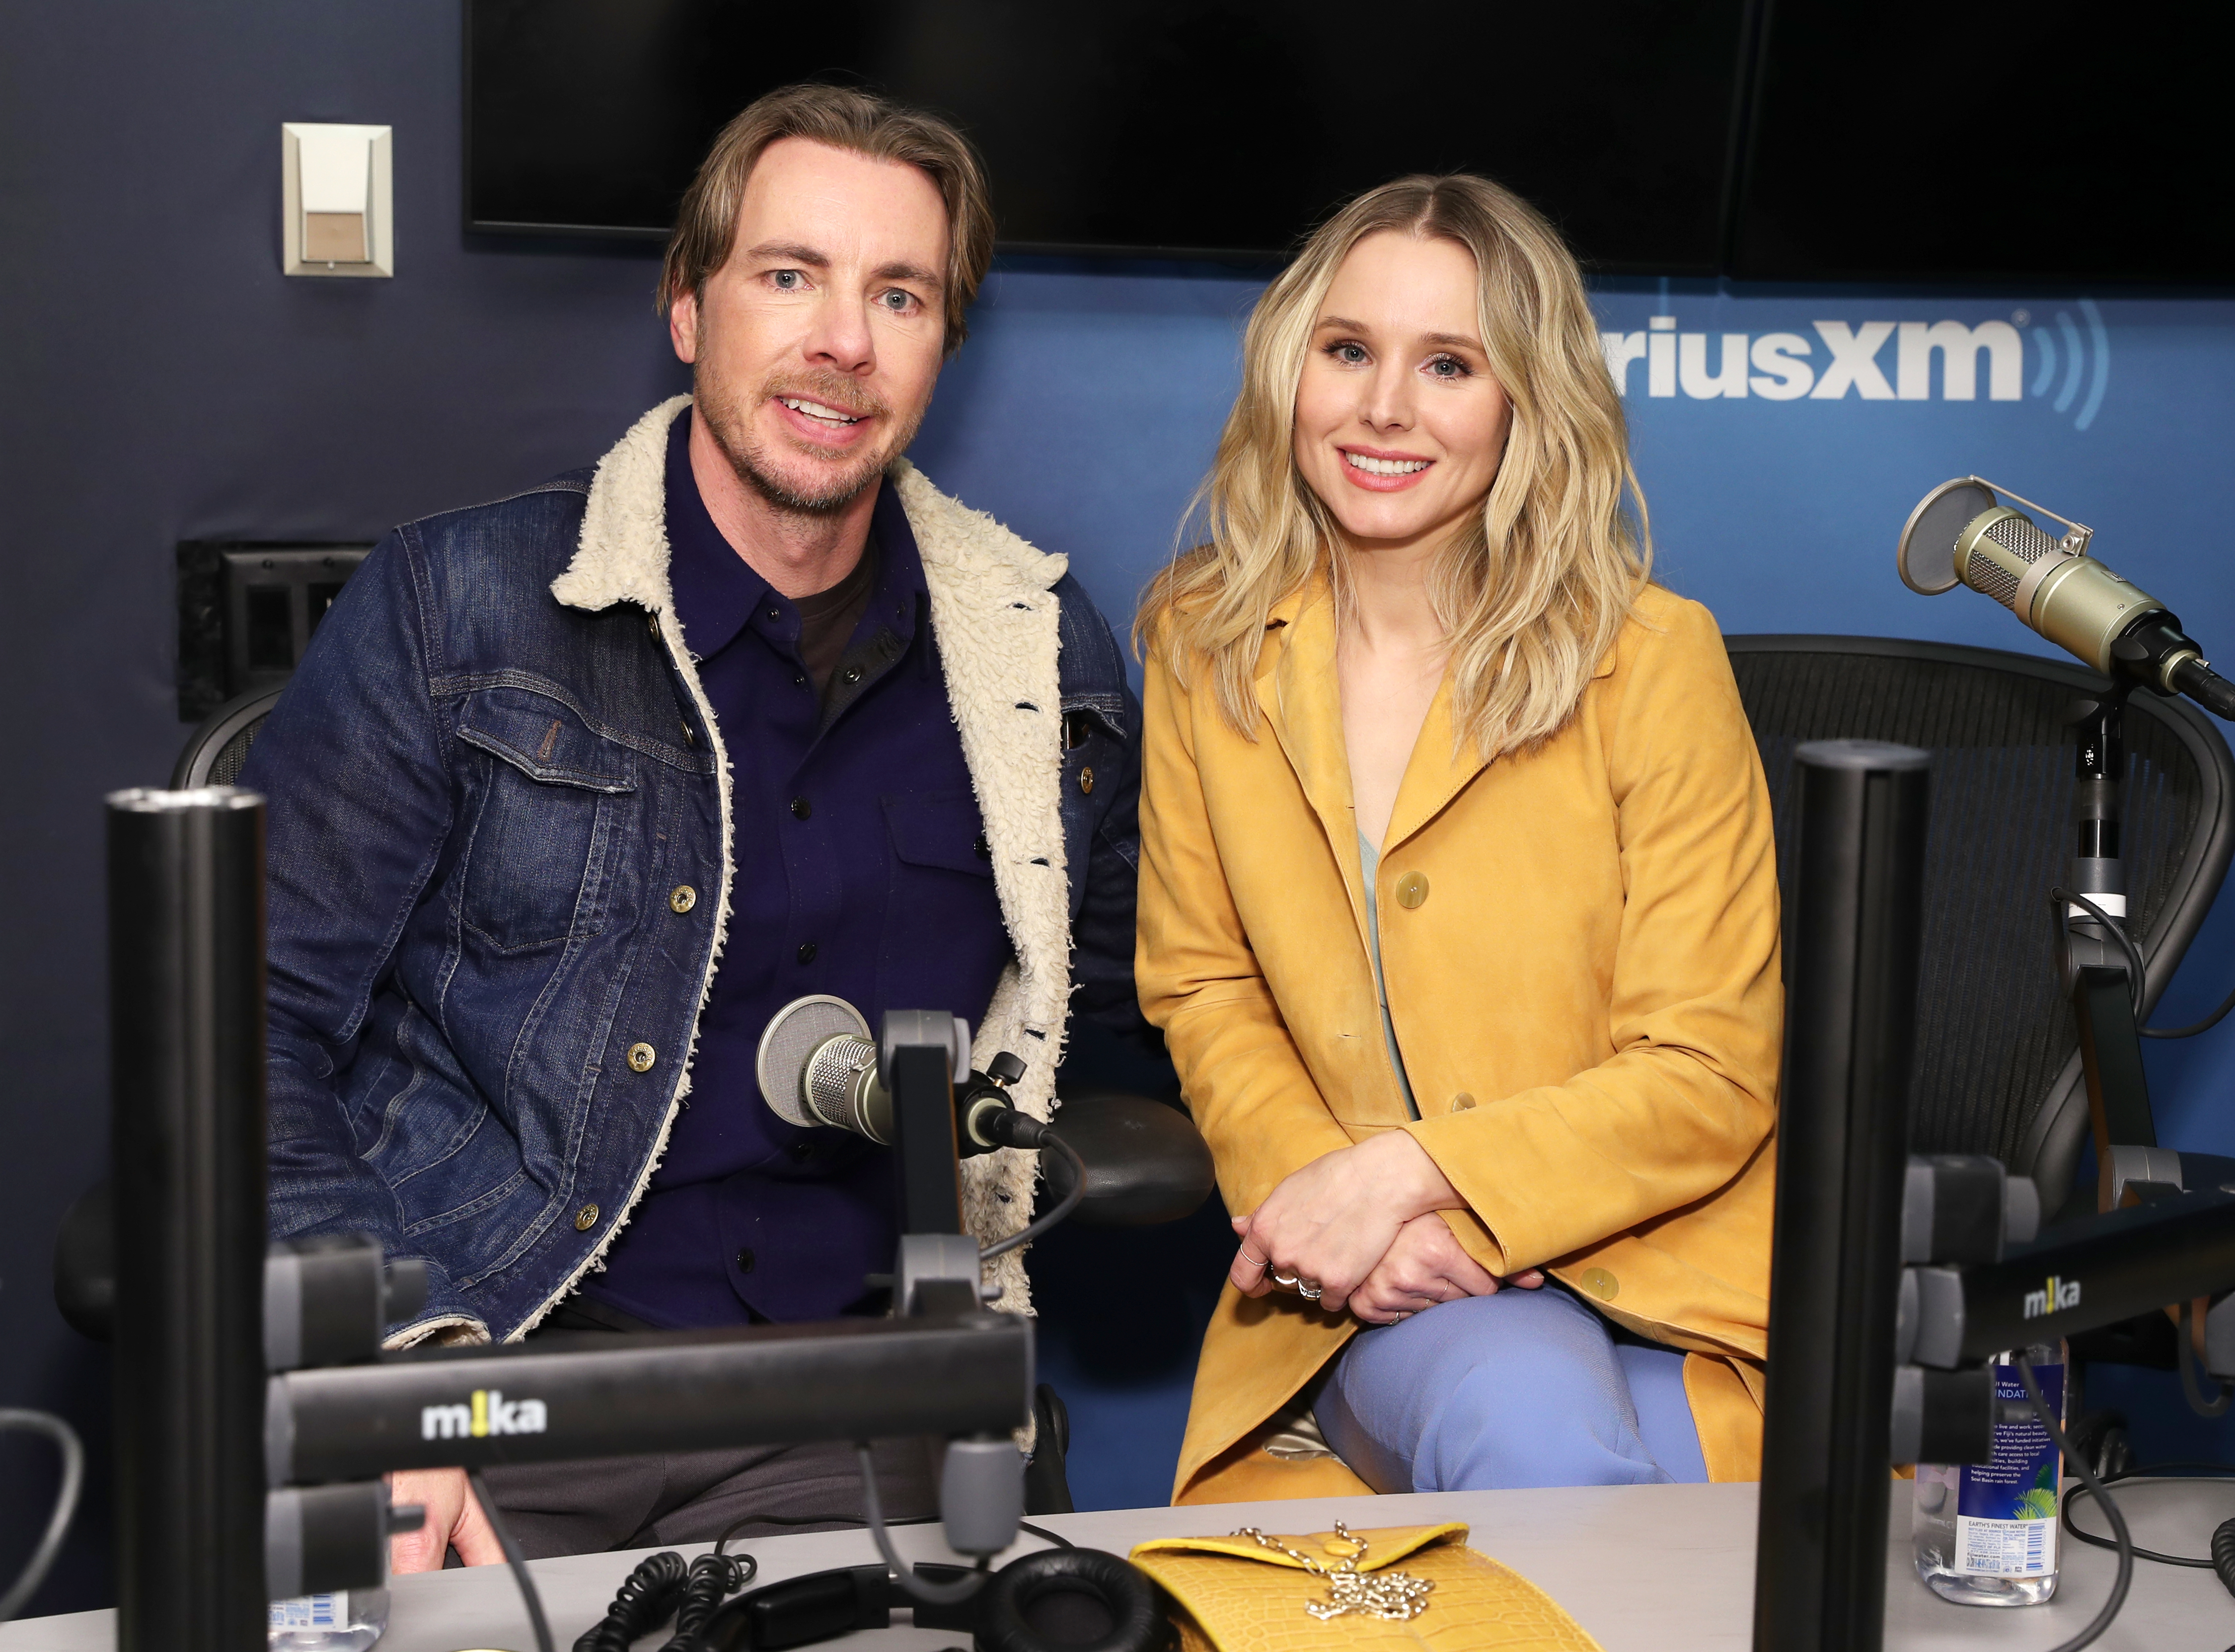 Dax Shepard and Kristen Bell visit the SiriusXM Studios in New York City on February 25, 2019 | Source: Getty Images